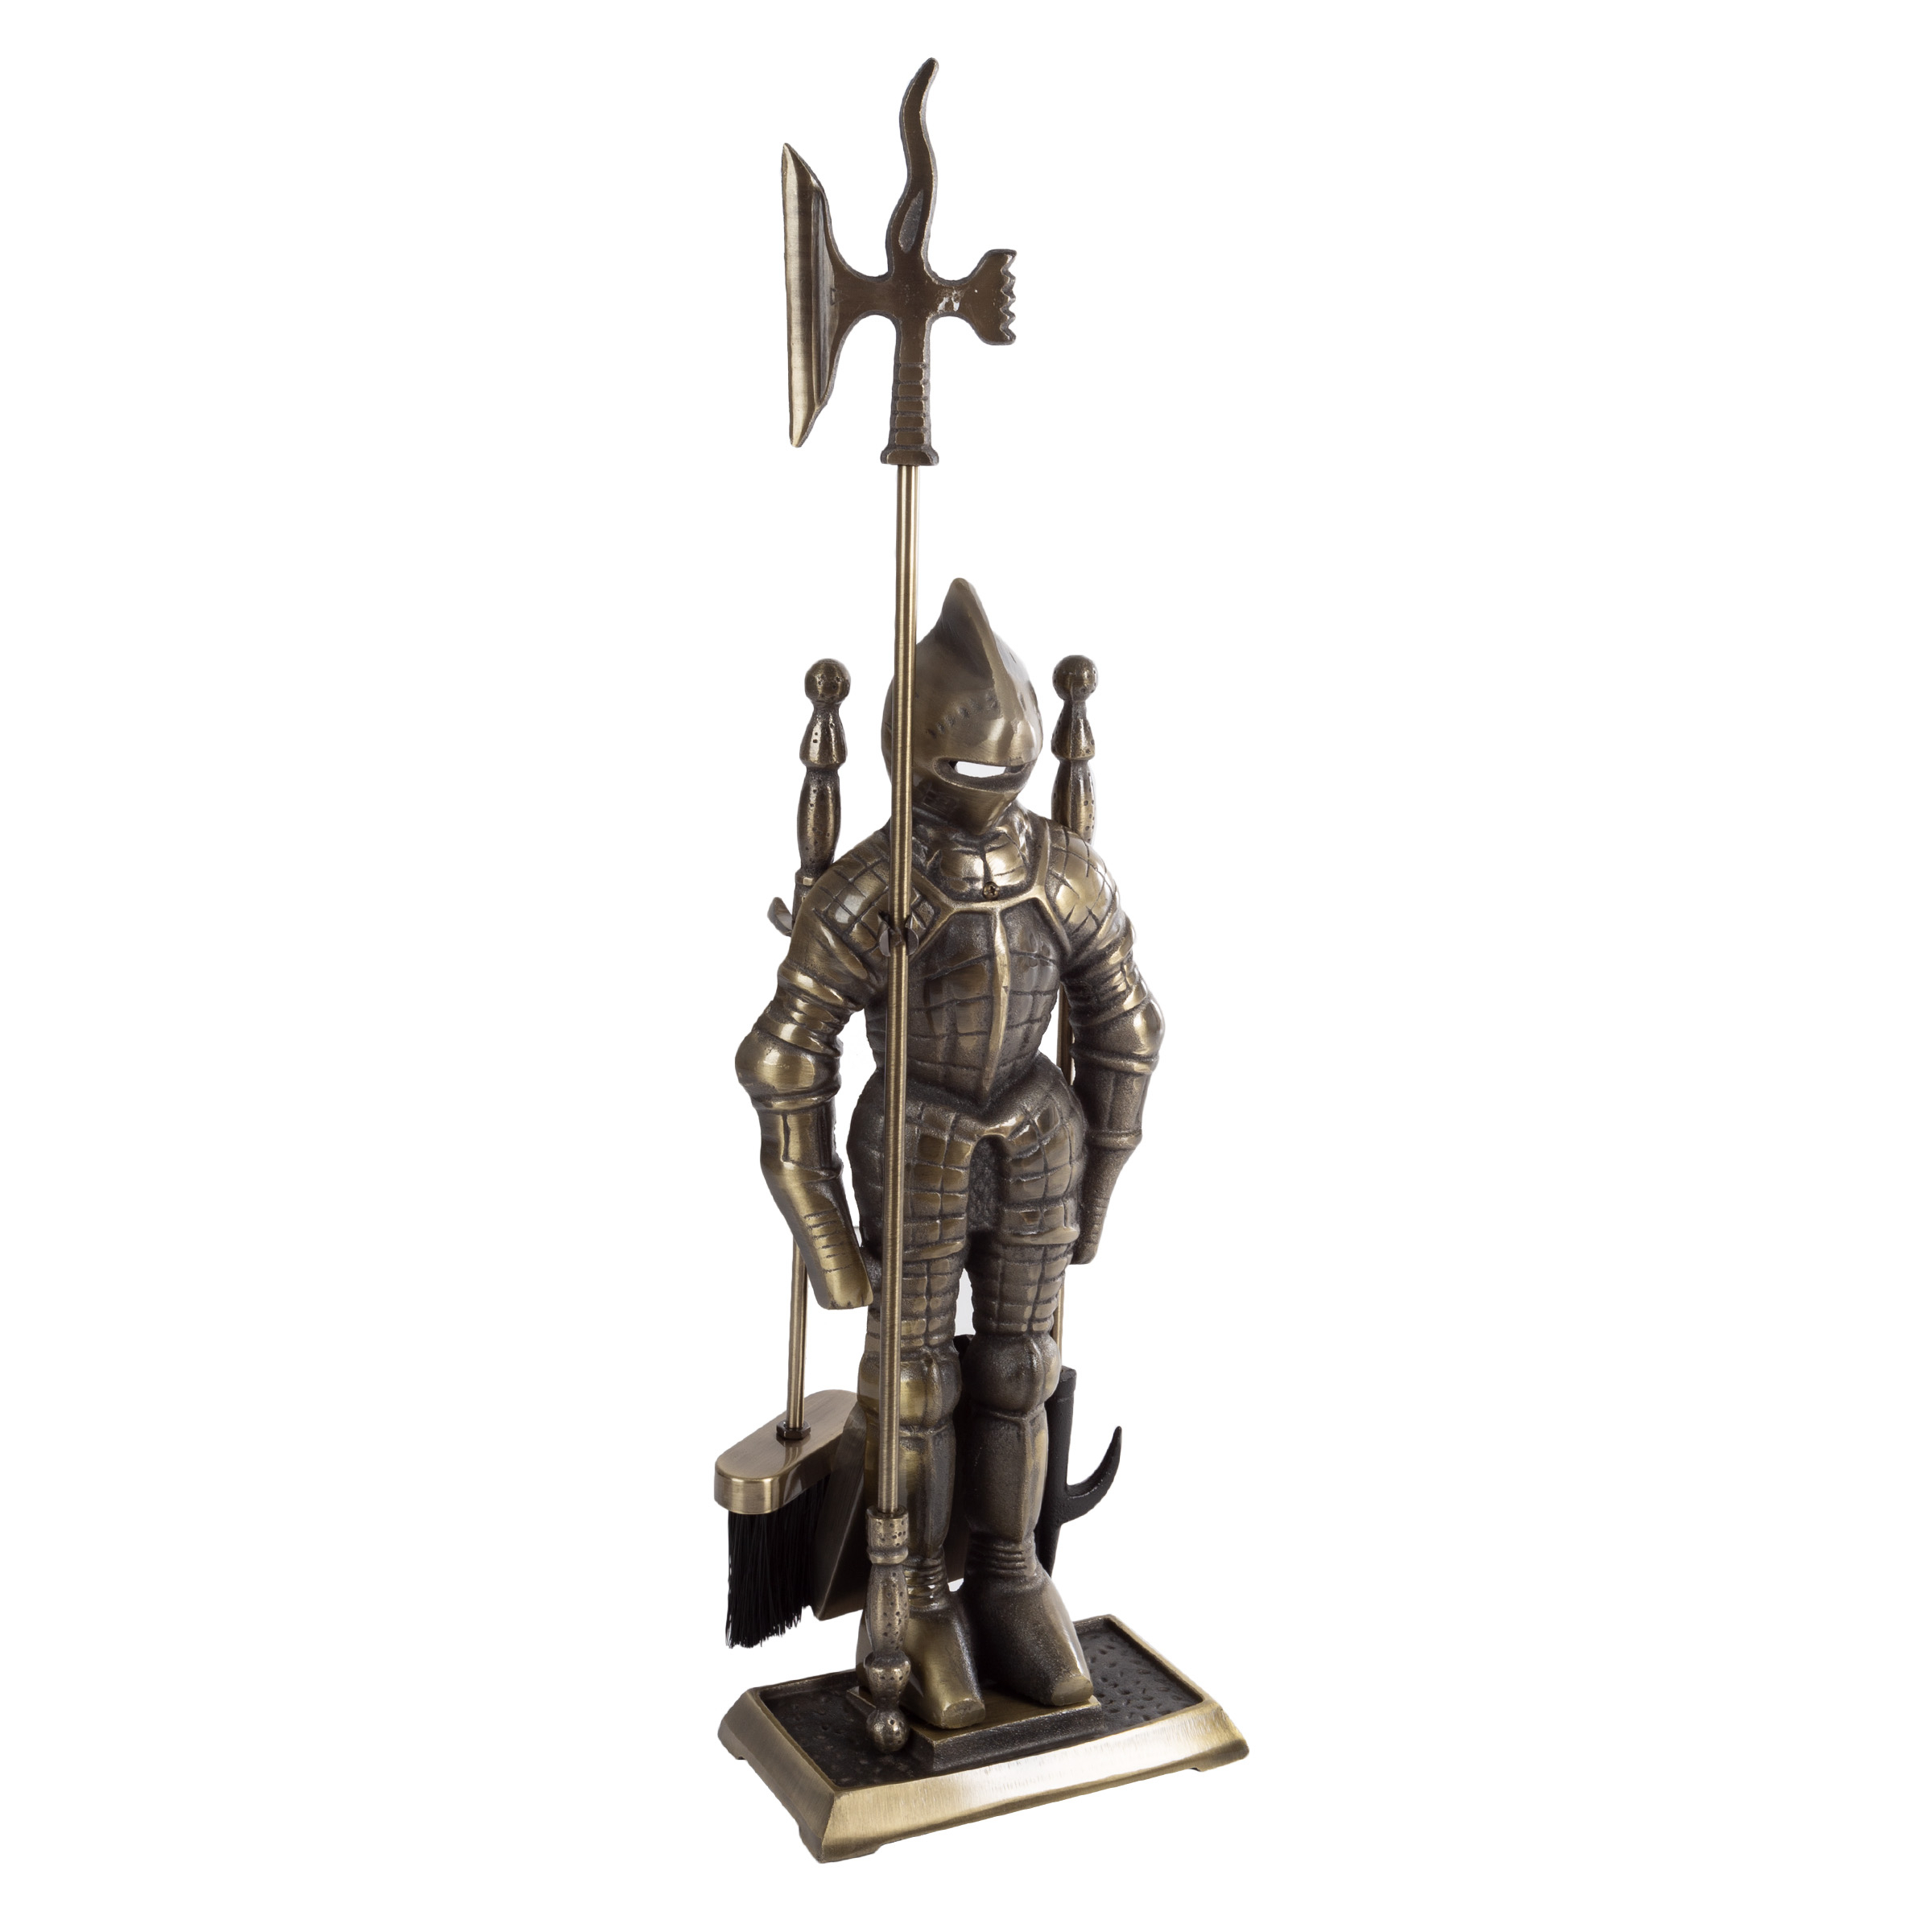 Fireplace Tool Set- Medieval Knight Cast Iron Statue Holds Heavy Duty Essential Tools